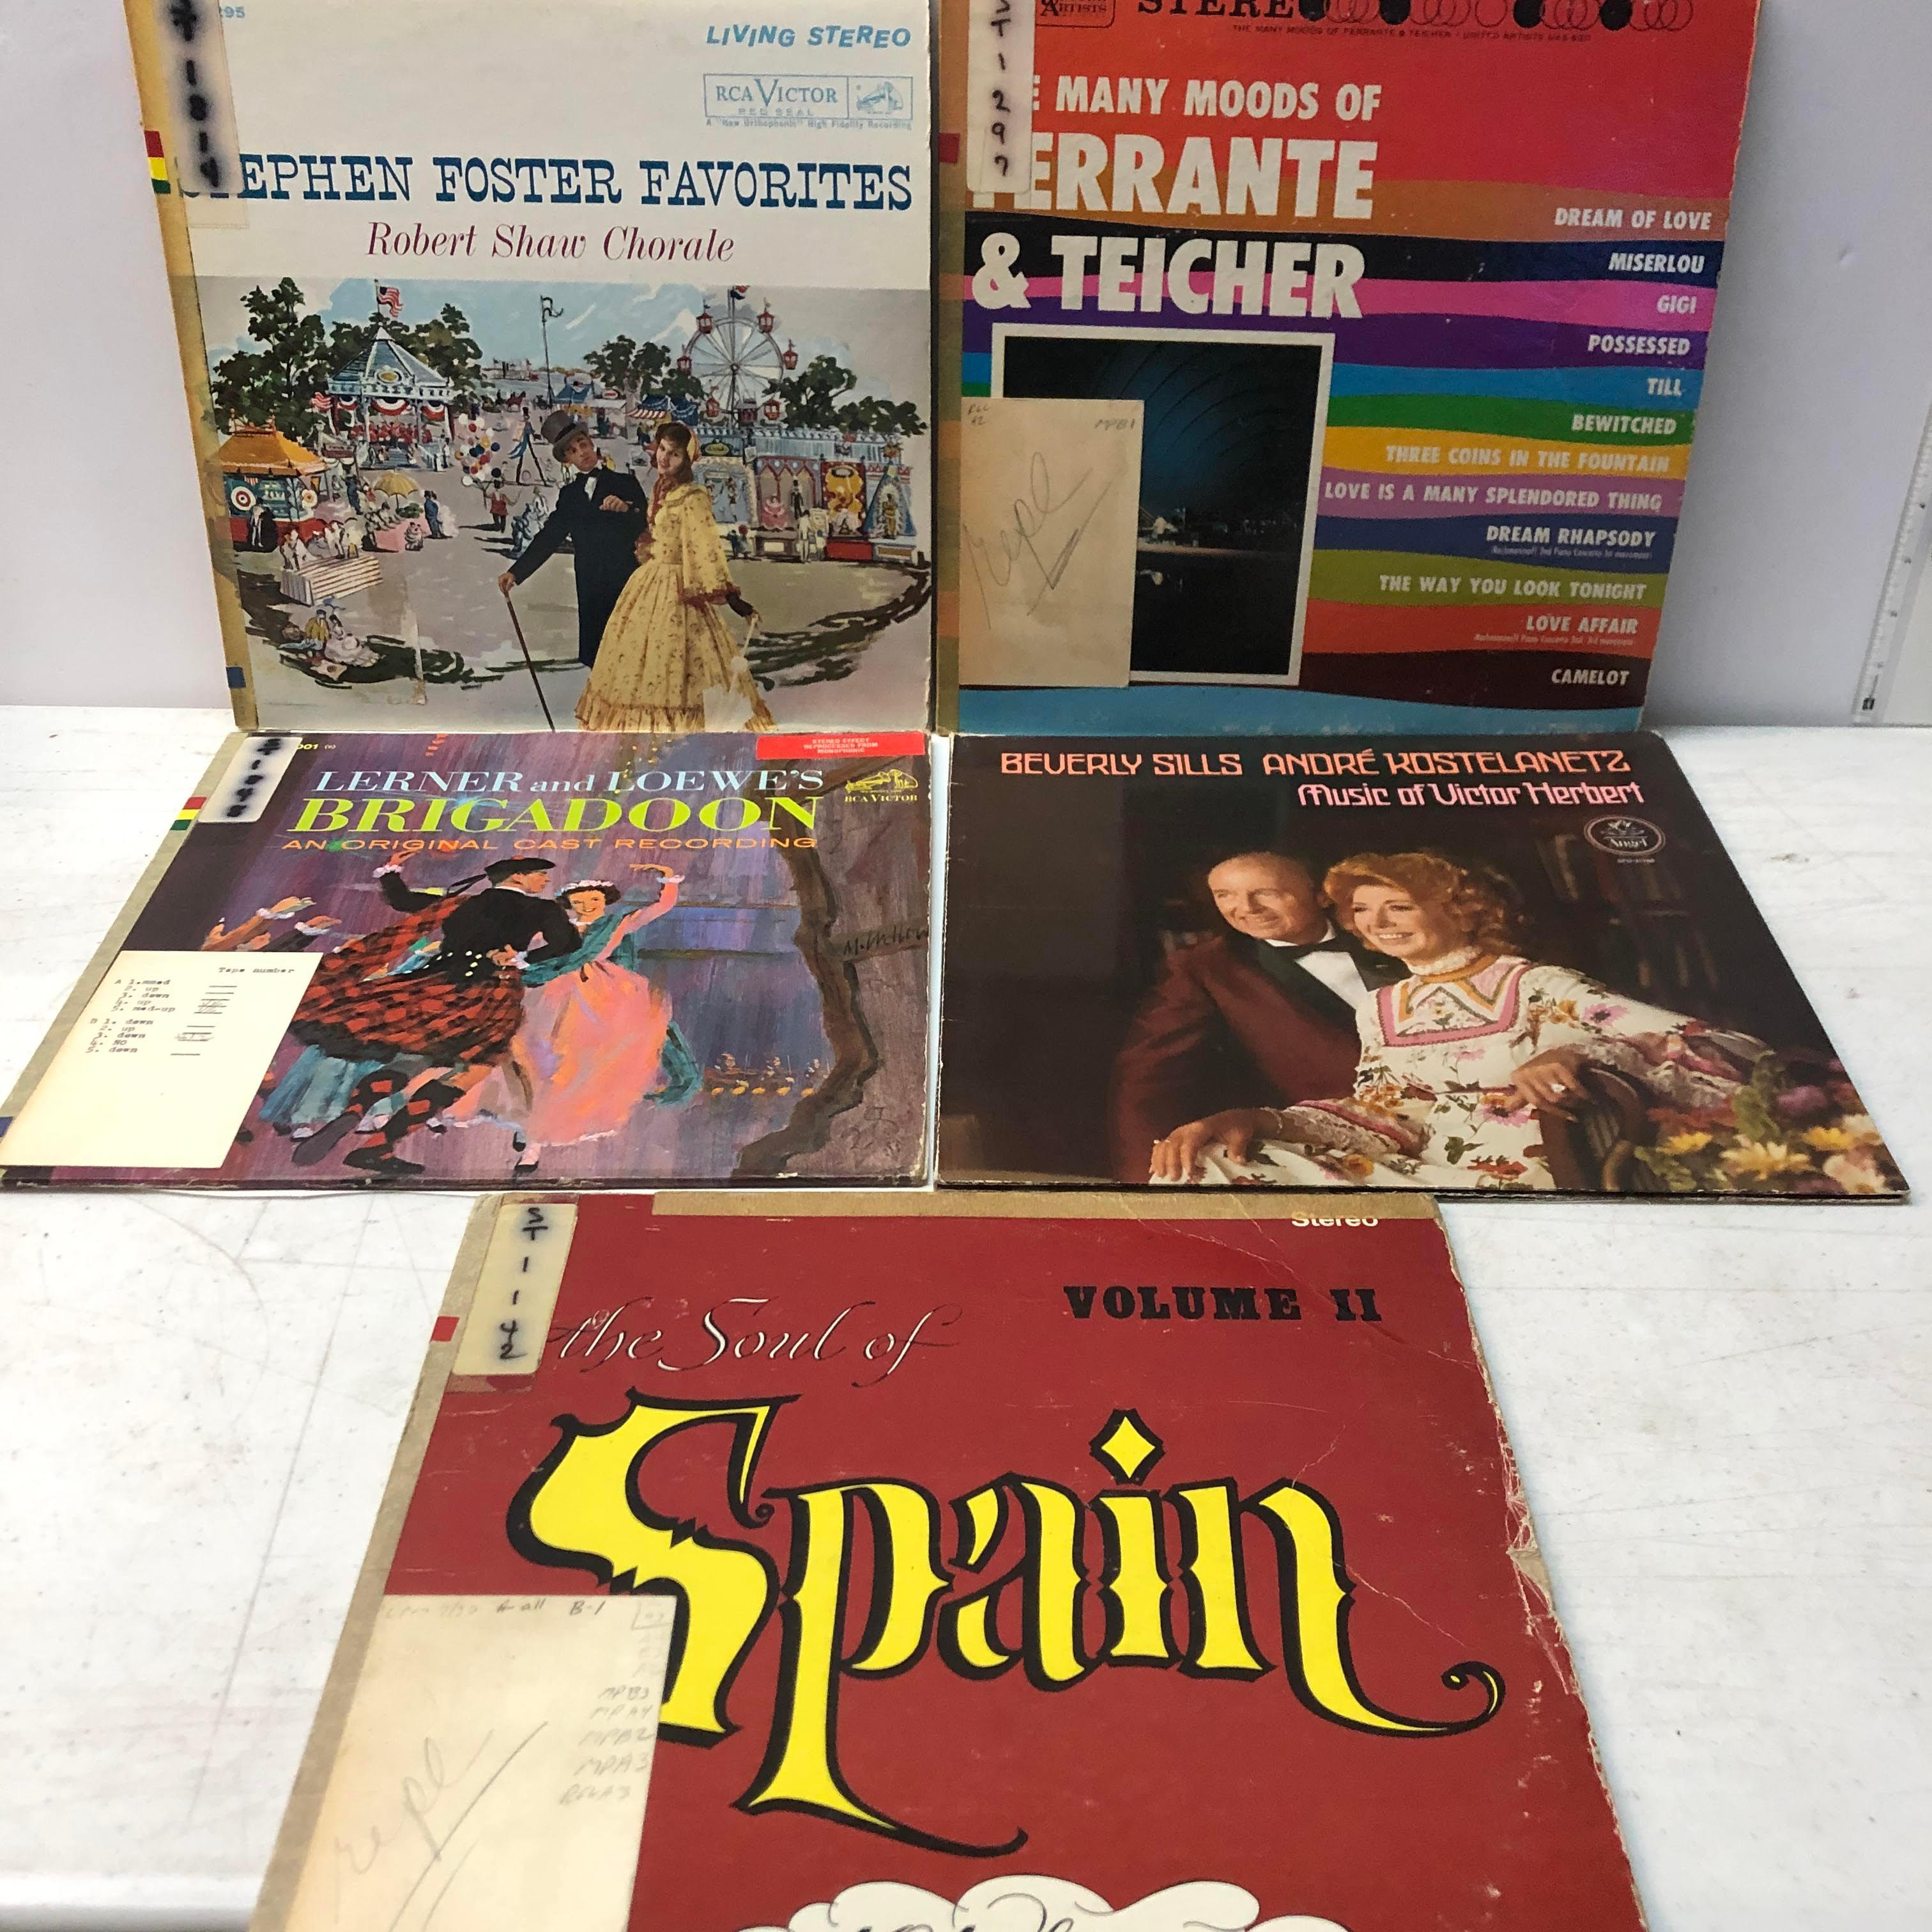 The Soul of Spain by 101 Strings and More Record Albums